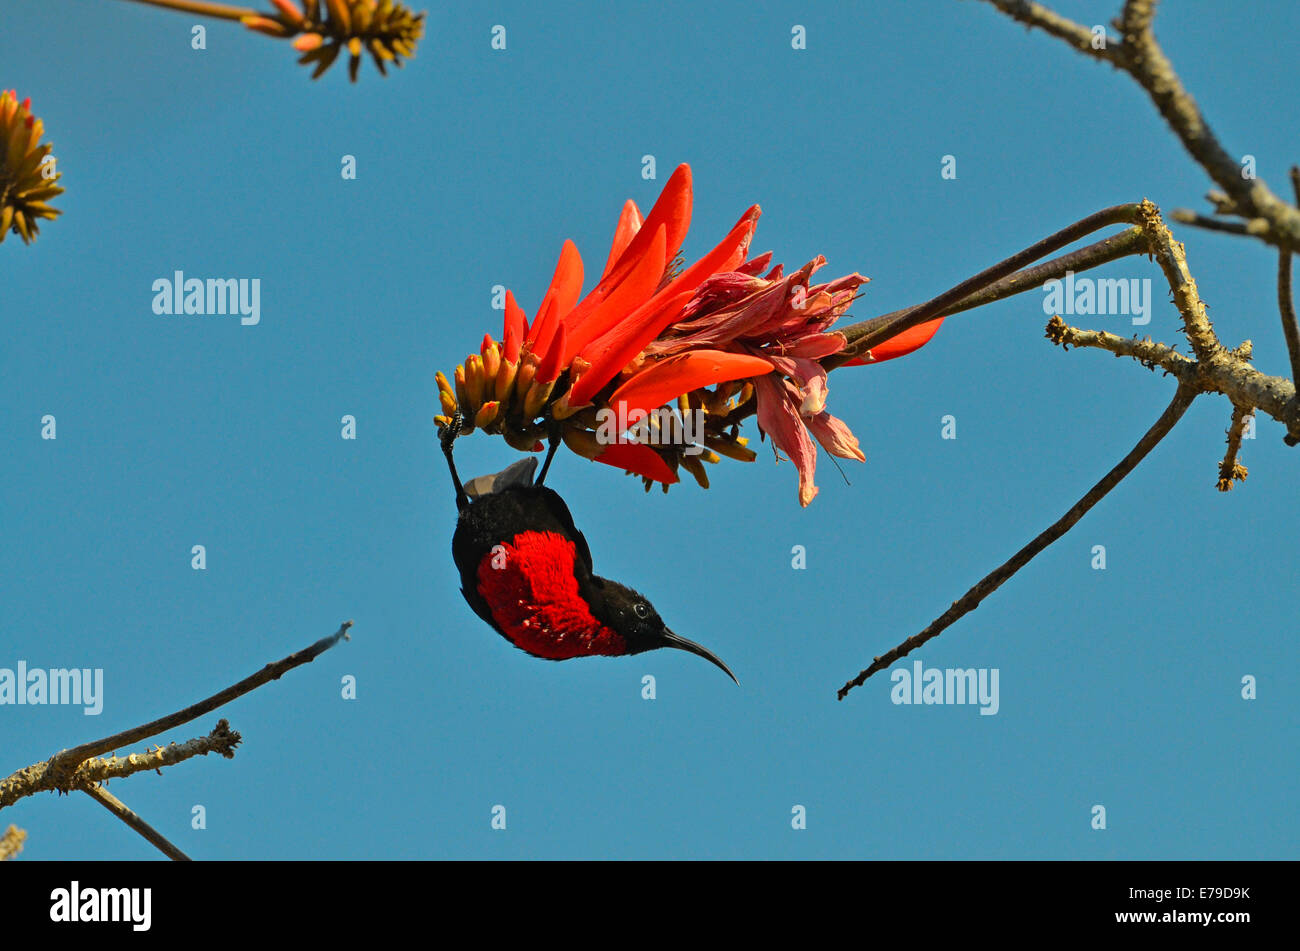 Scarlet chested sunbird hanging from red blossoms of coral tree, Kruger Park, South Africa. Stock Photo